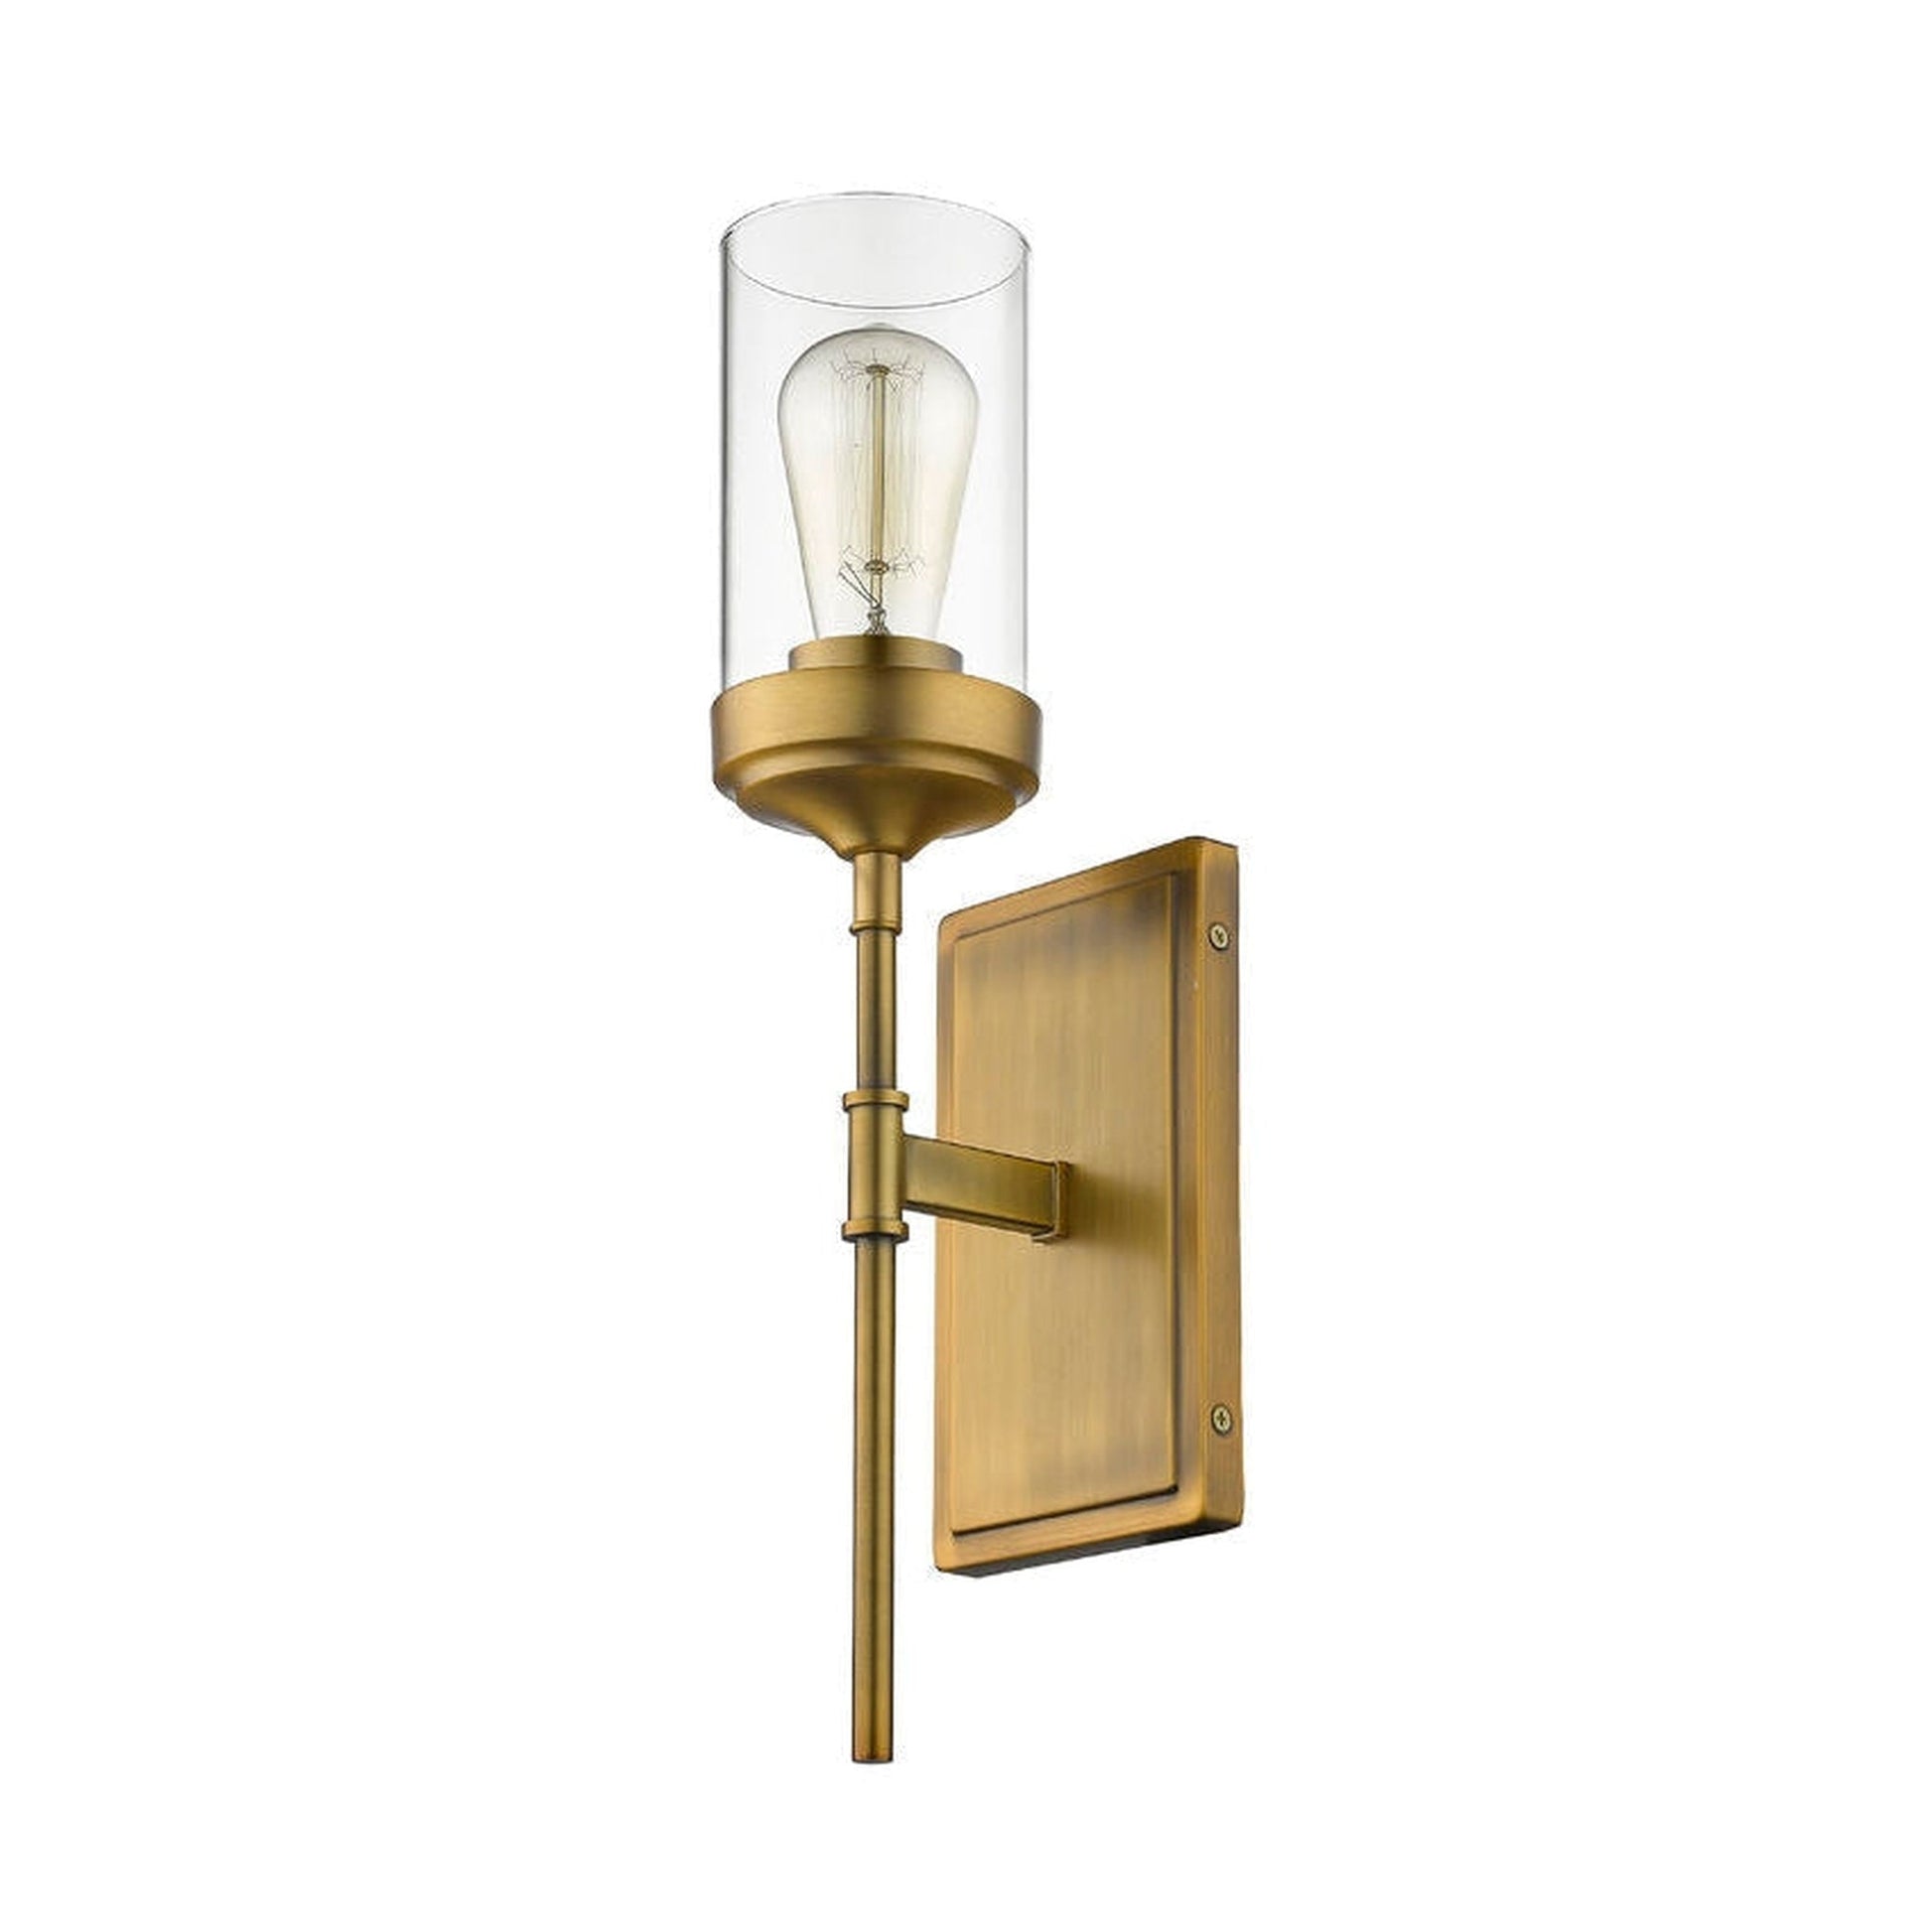 Z-Lite Calliope 5" 1-Light Foundry Brass Wall Sconce With Clear Glass Shade